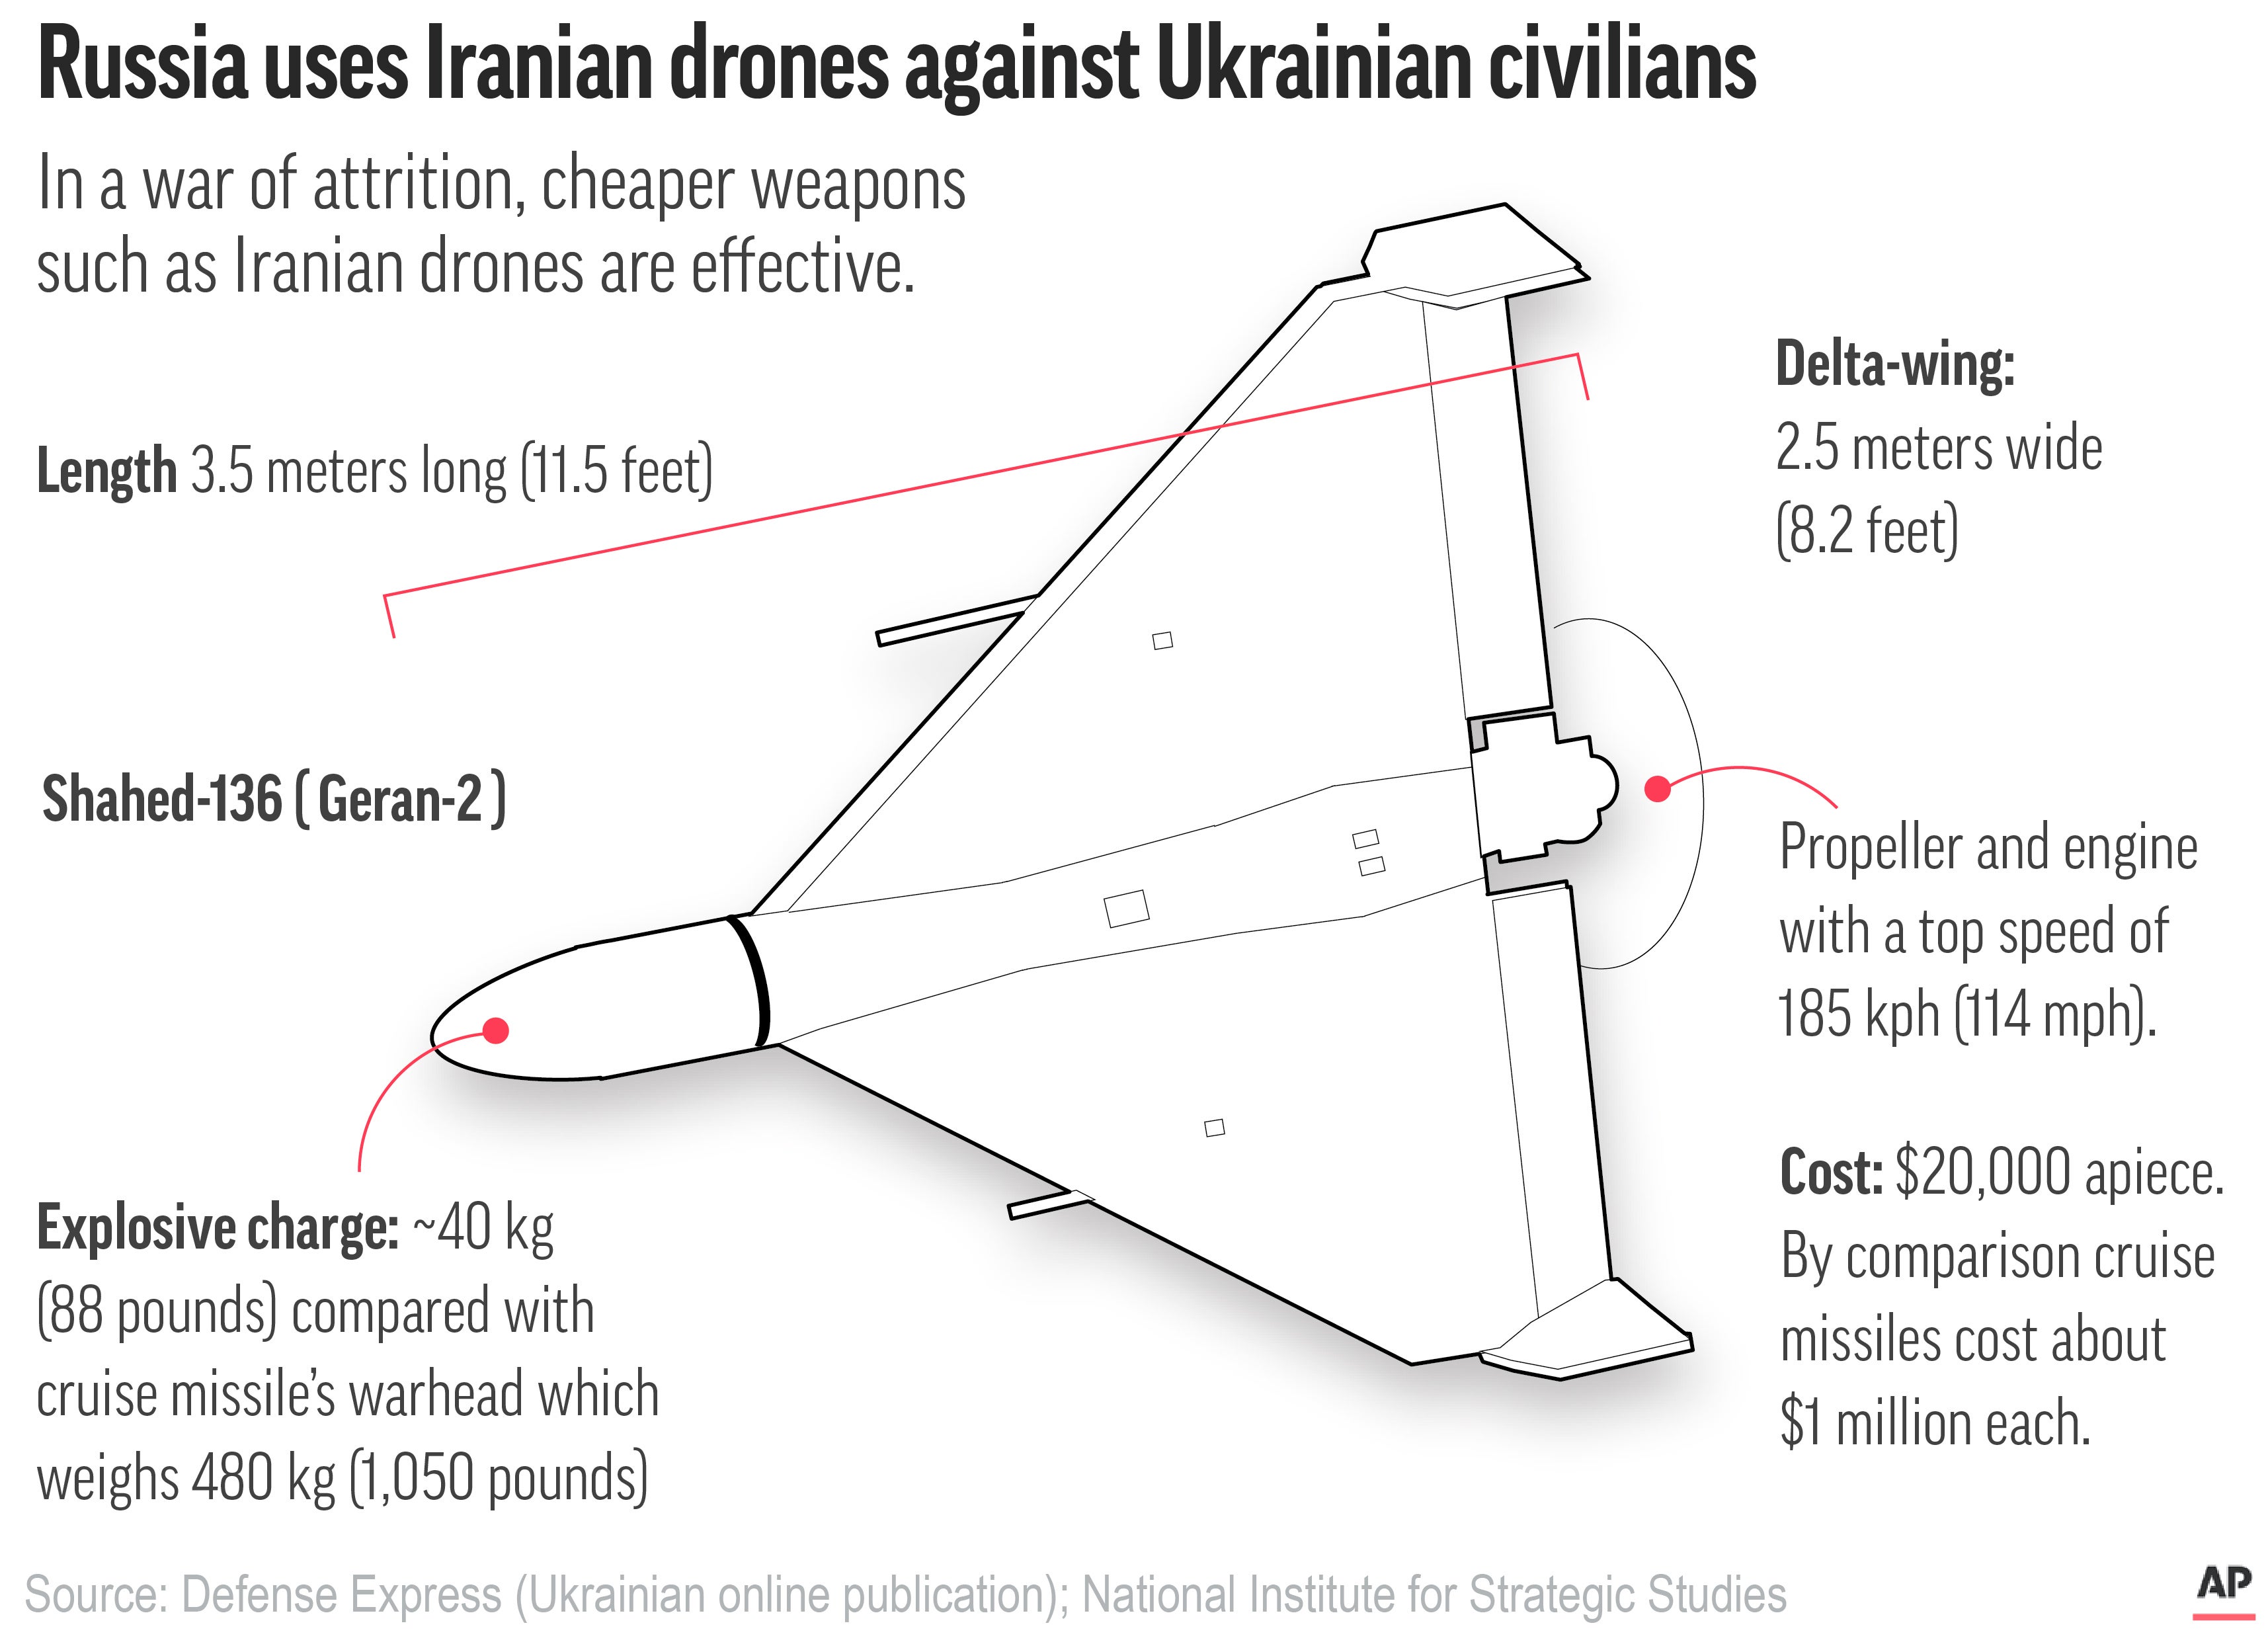 Russia is unleashing successive waves of the Iranian-made Shahed drones over Ukraine